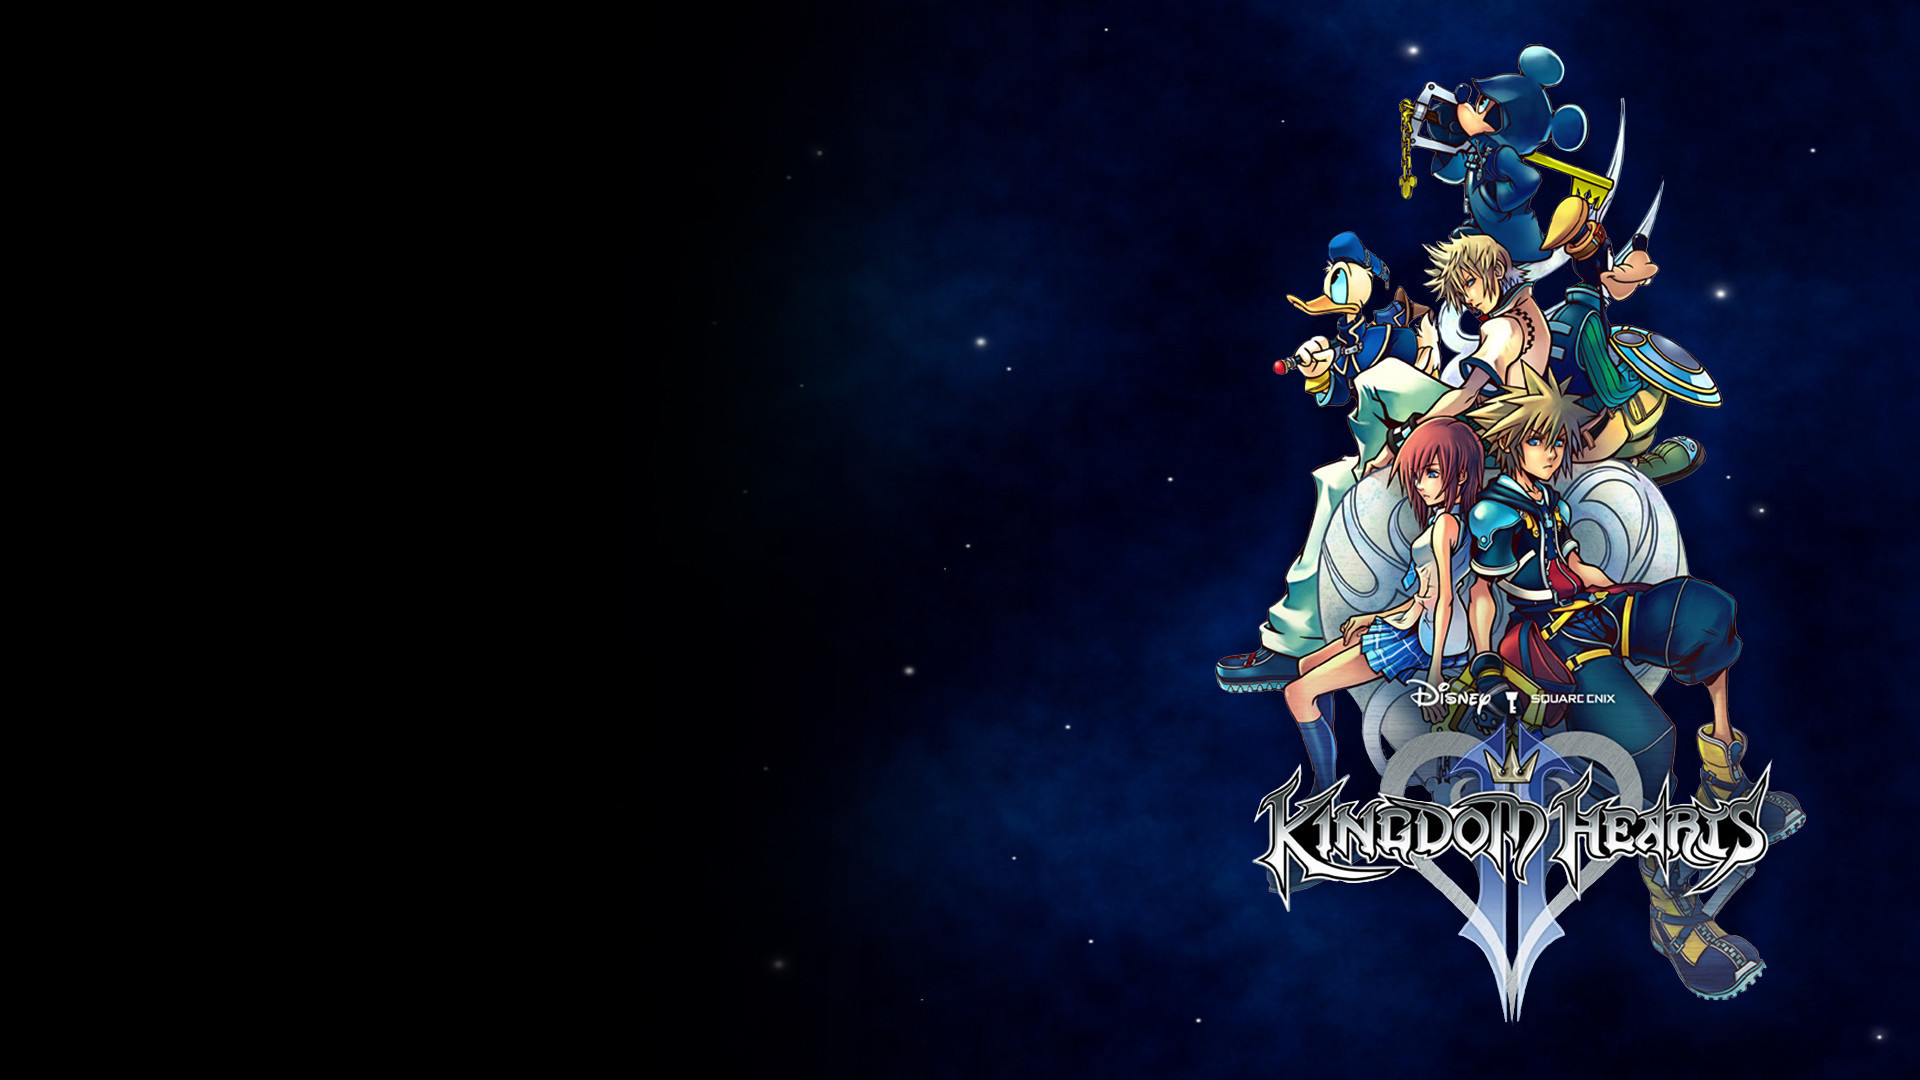 1920x1080  Here is a collection of Kingdom Hearts wallpapers that I  compiled. Feel free to